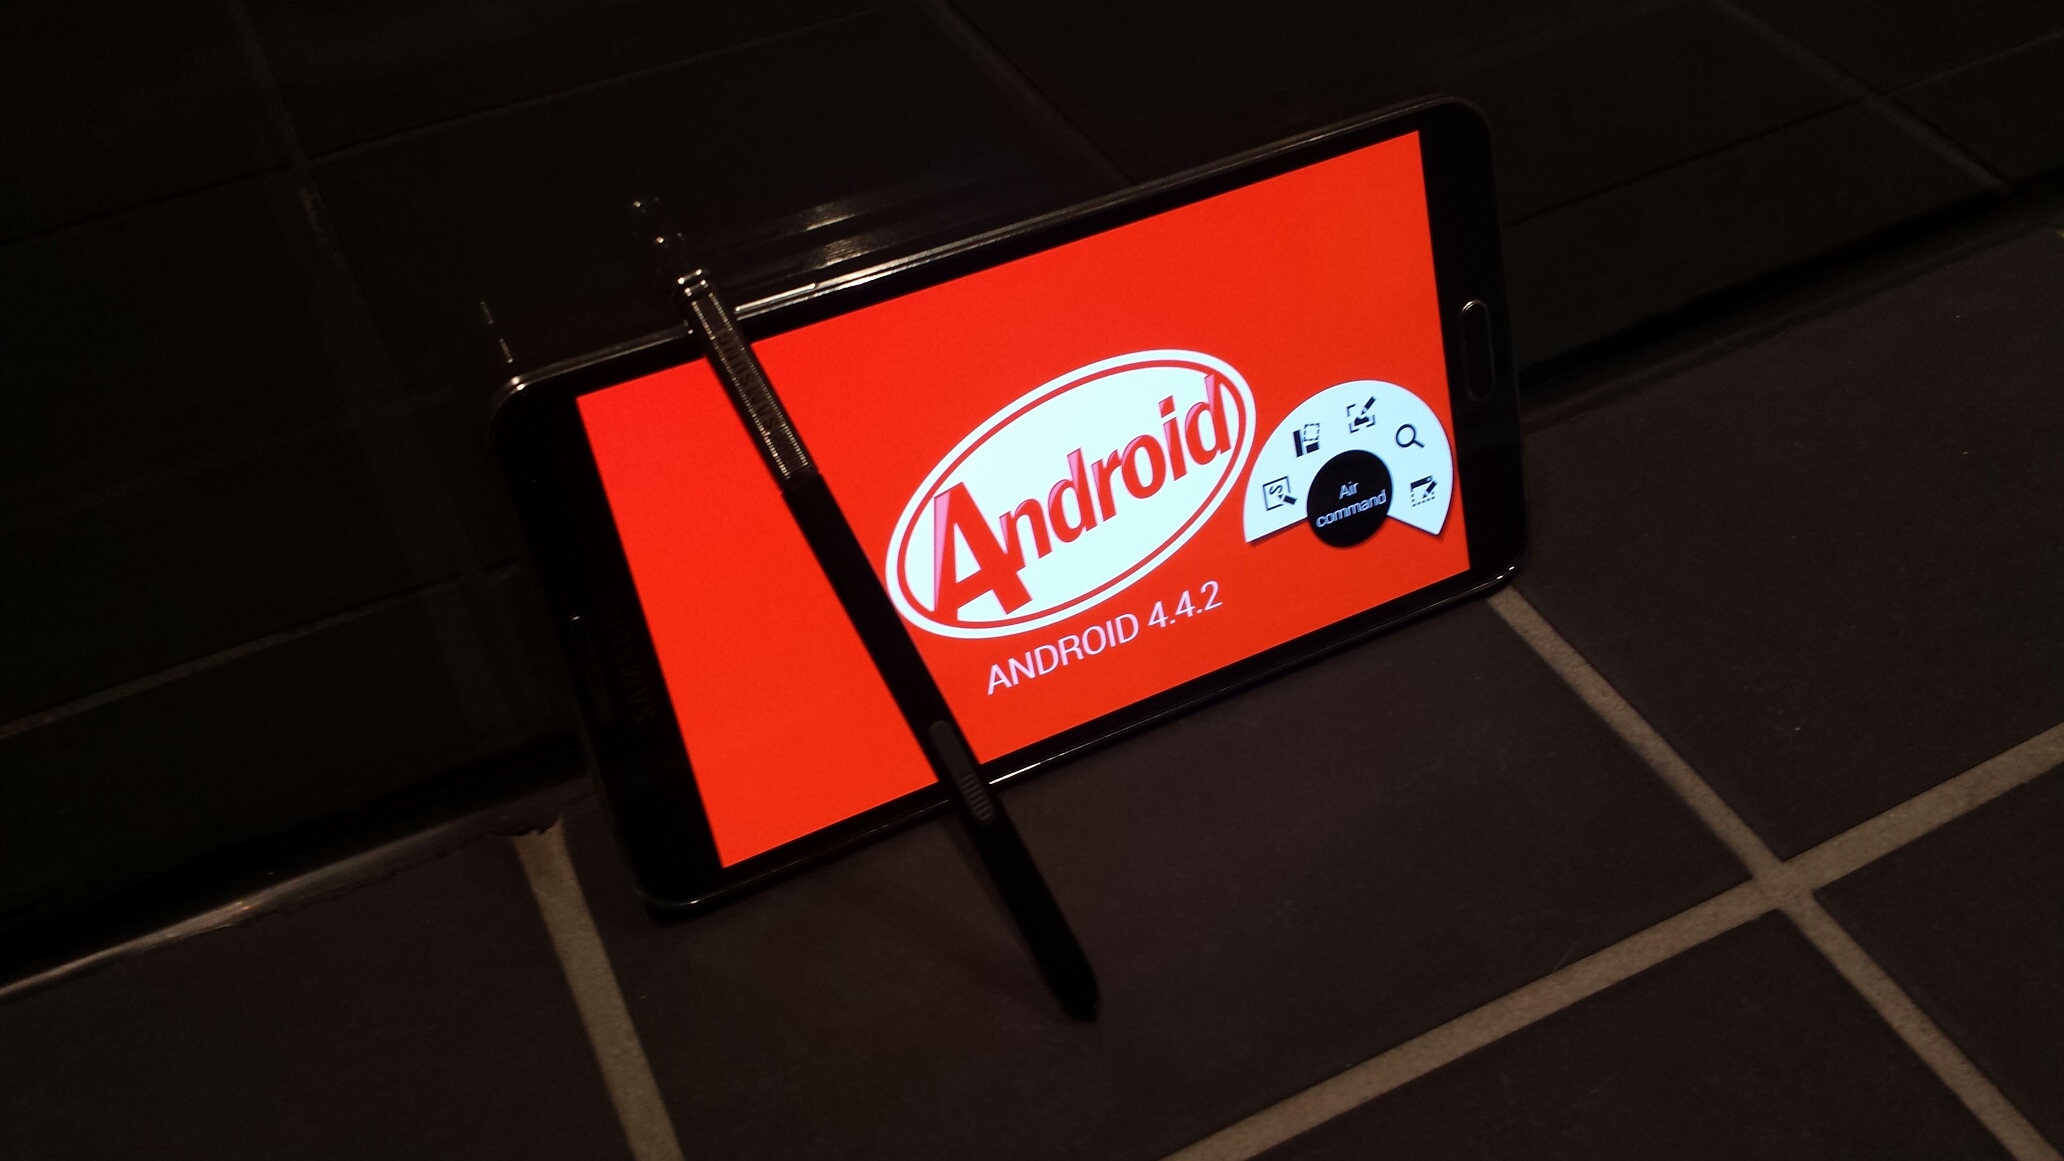 Samsung official Android 4.4.2 KitKat